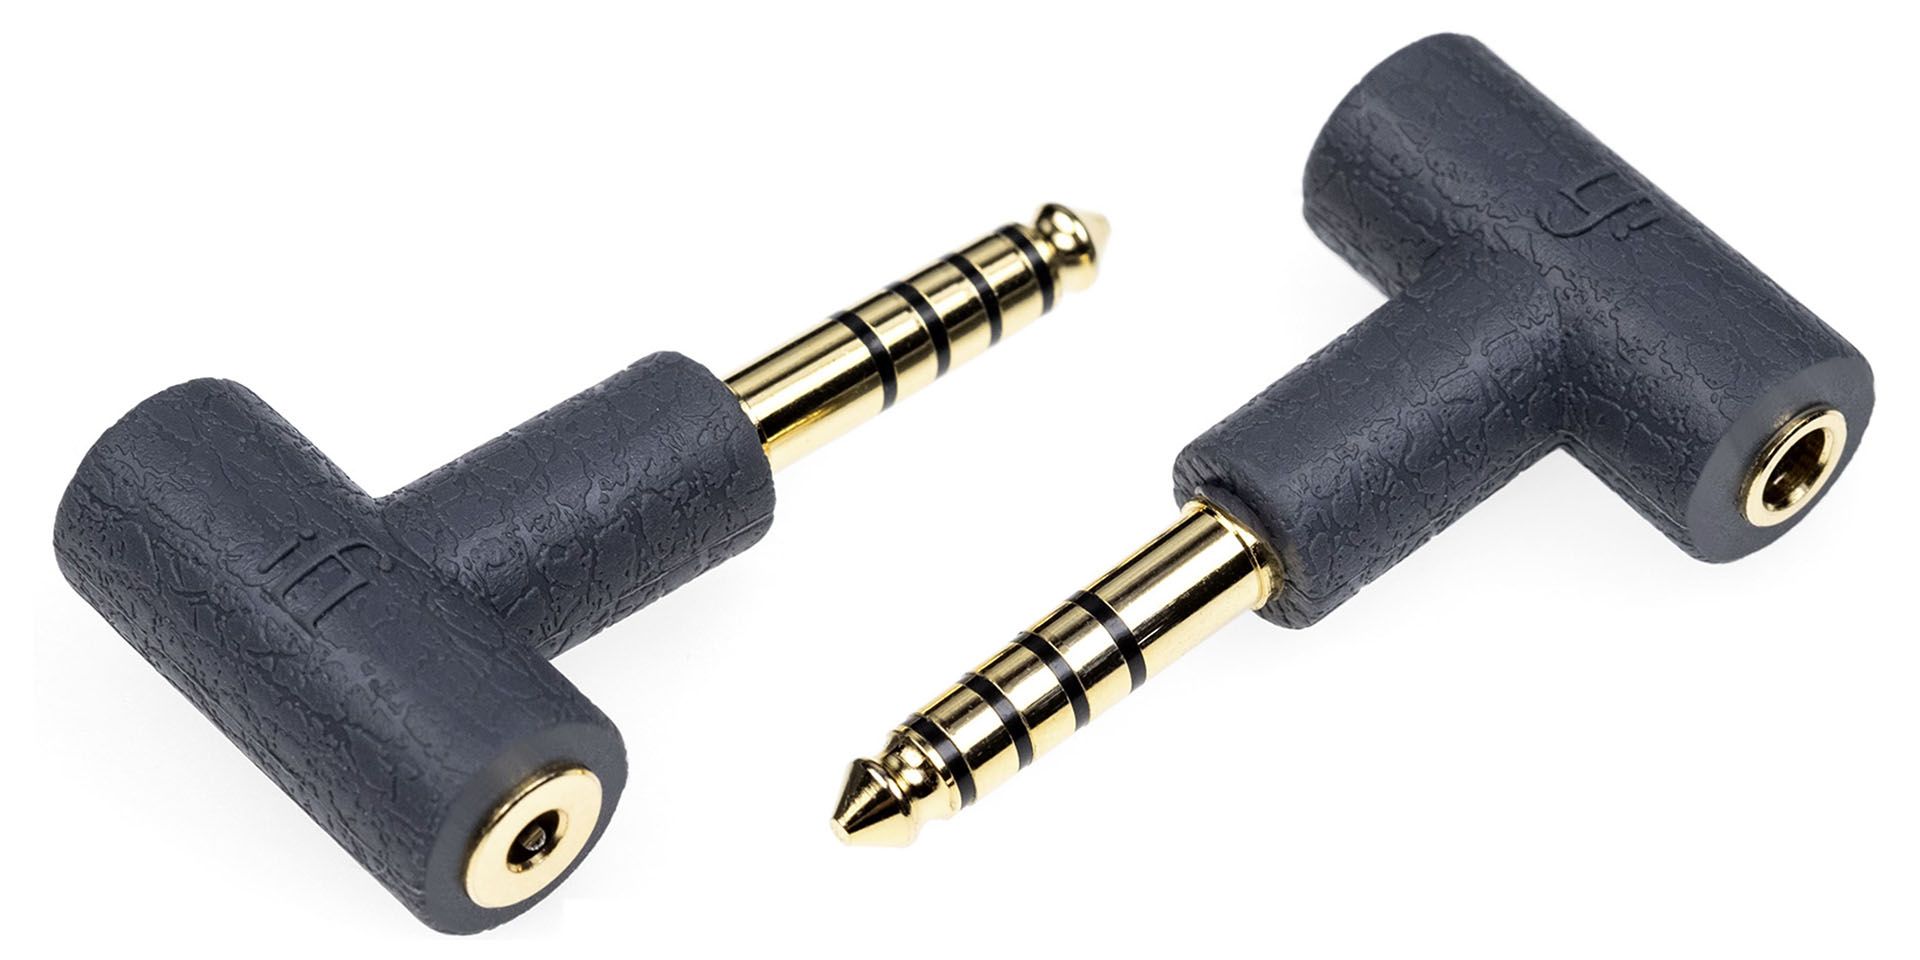 3.5 mm adapter 4.4 mm - on order